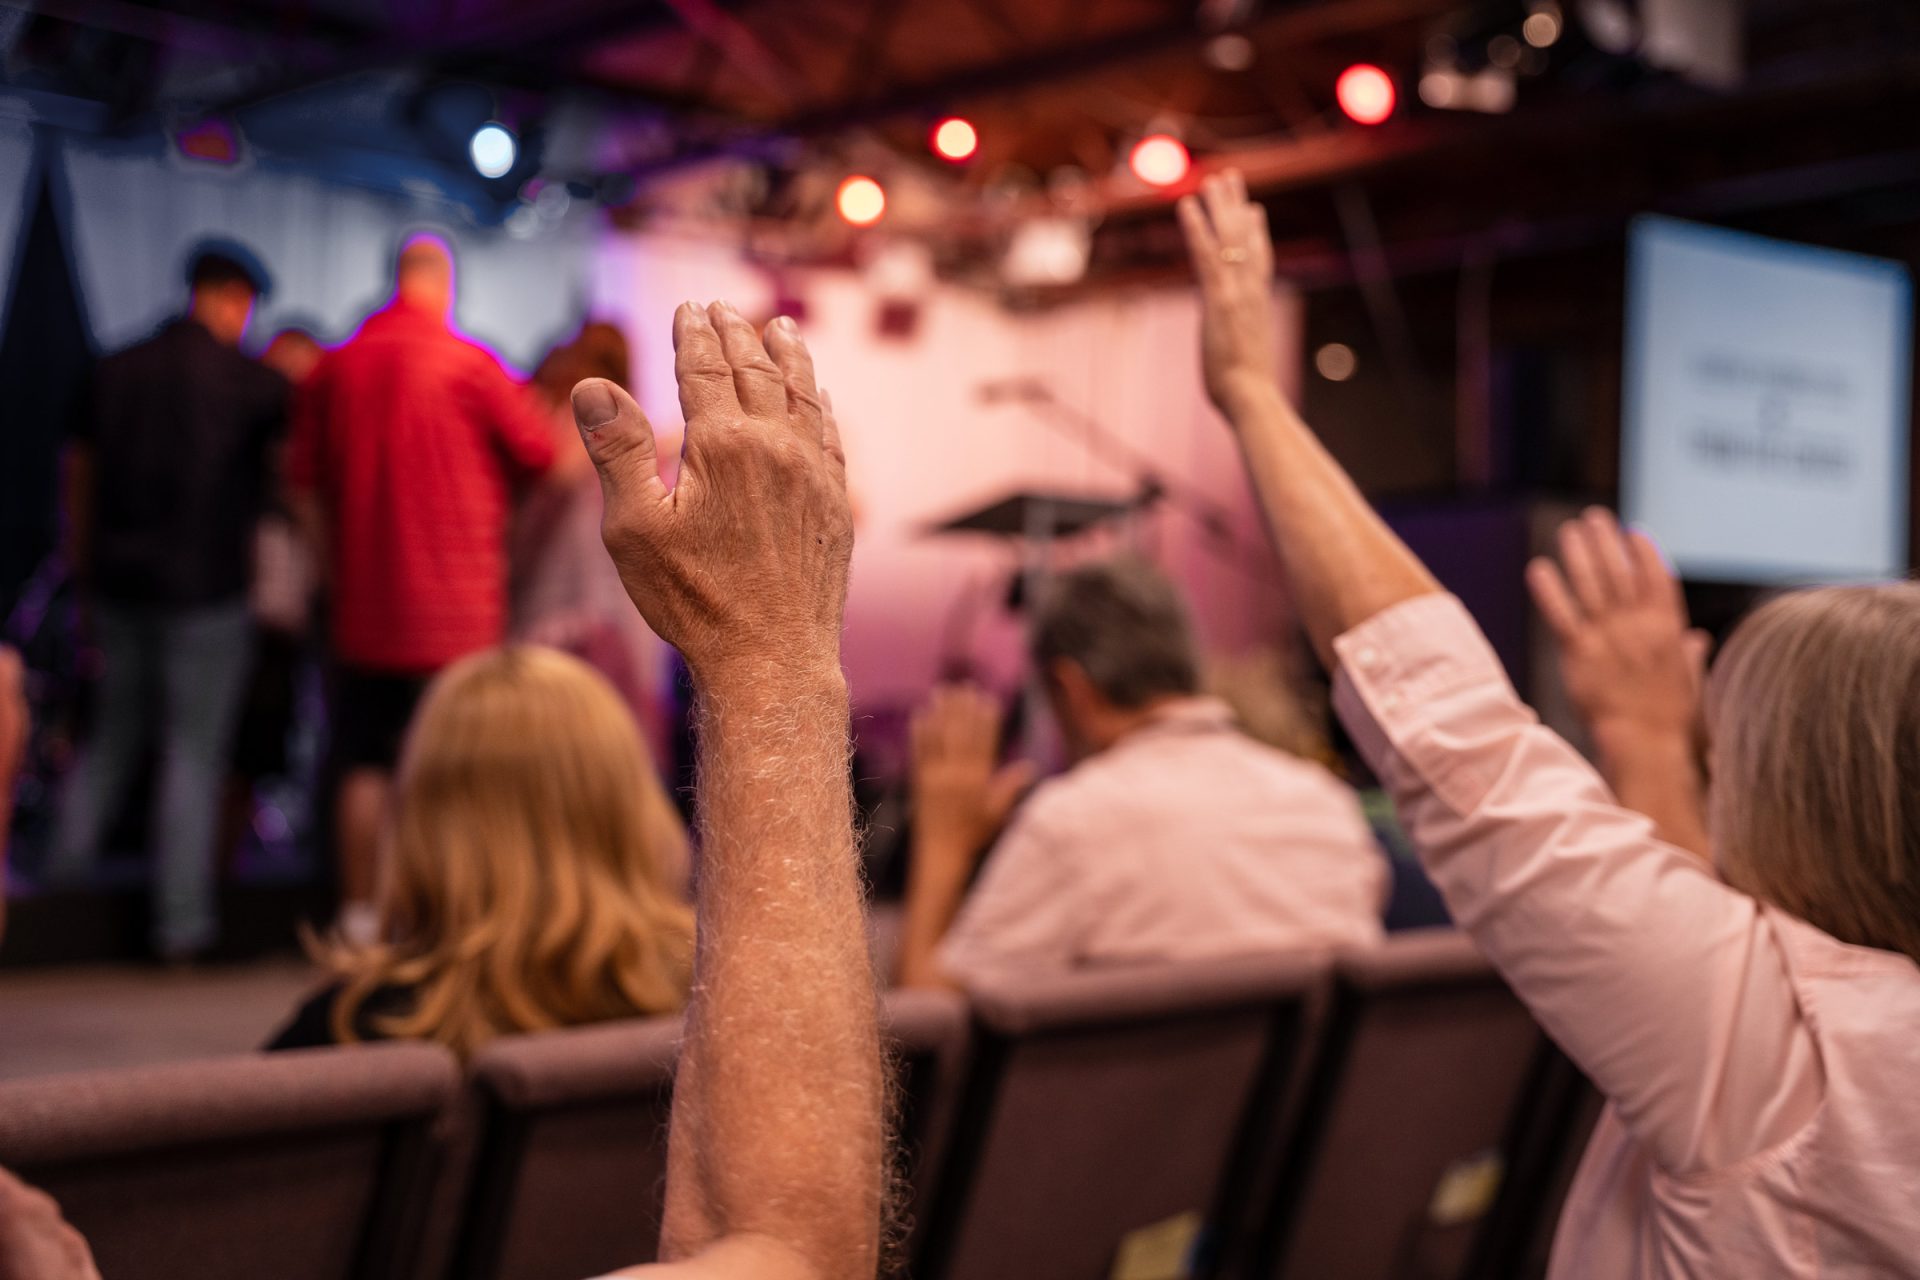 People worshiping in a church with their hands raised.